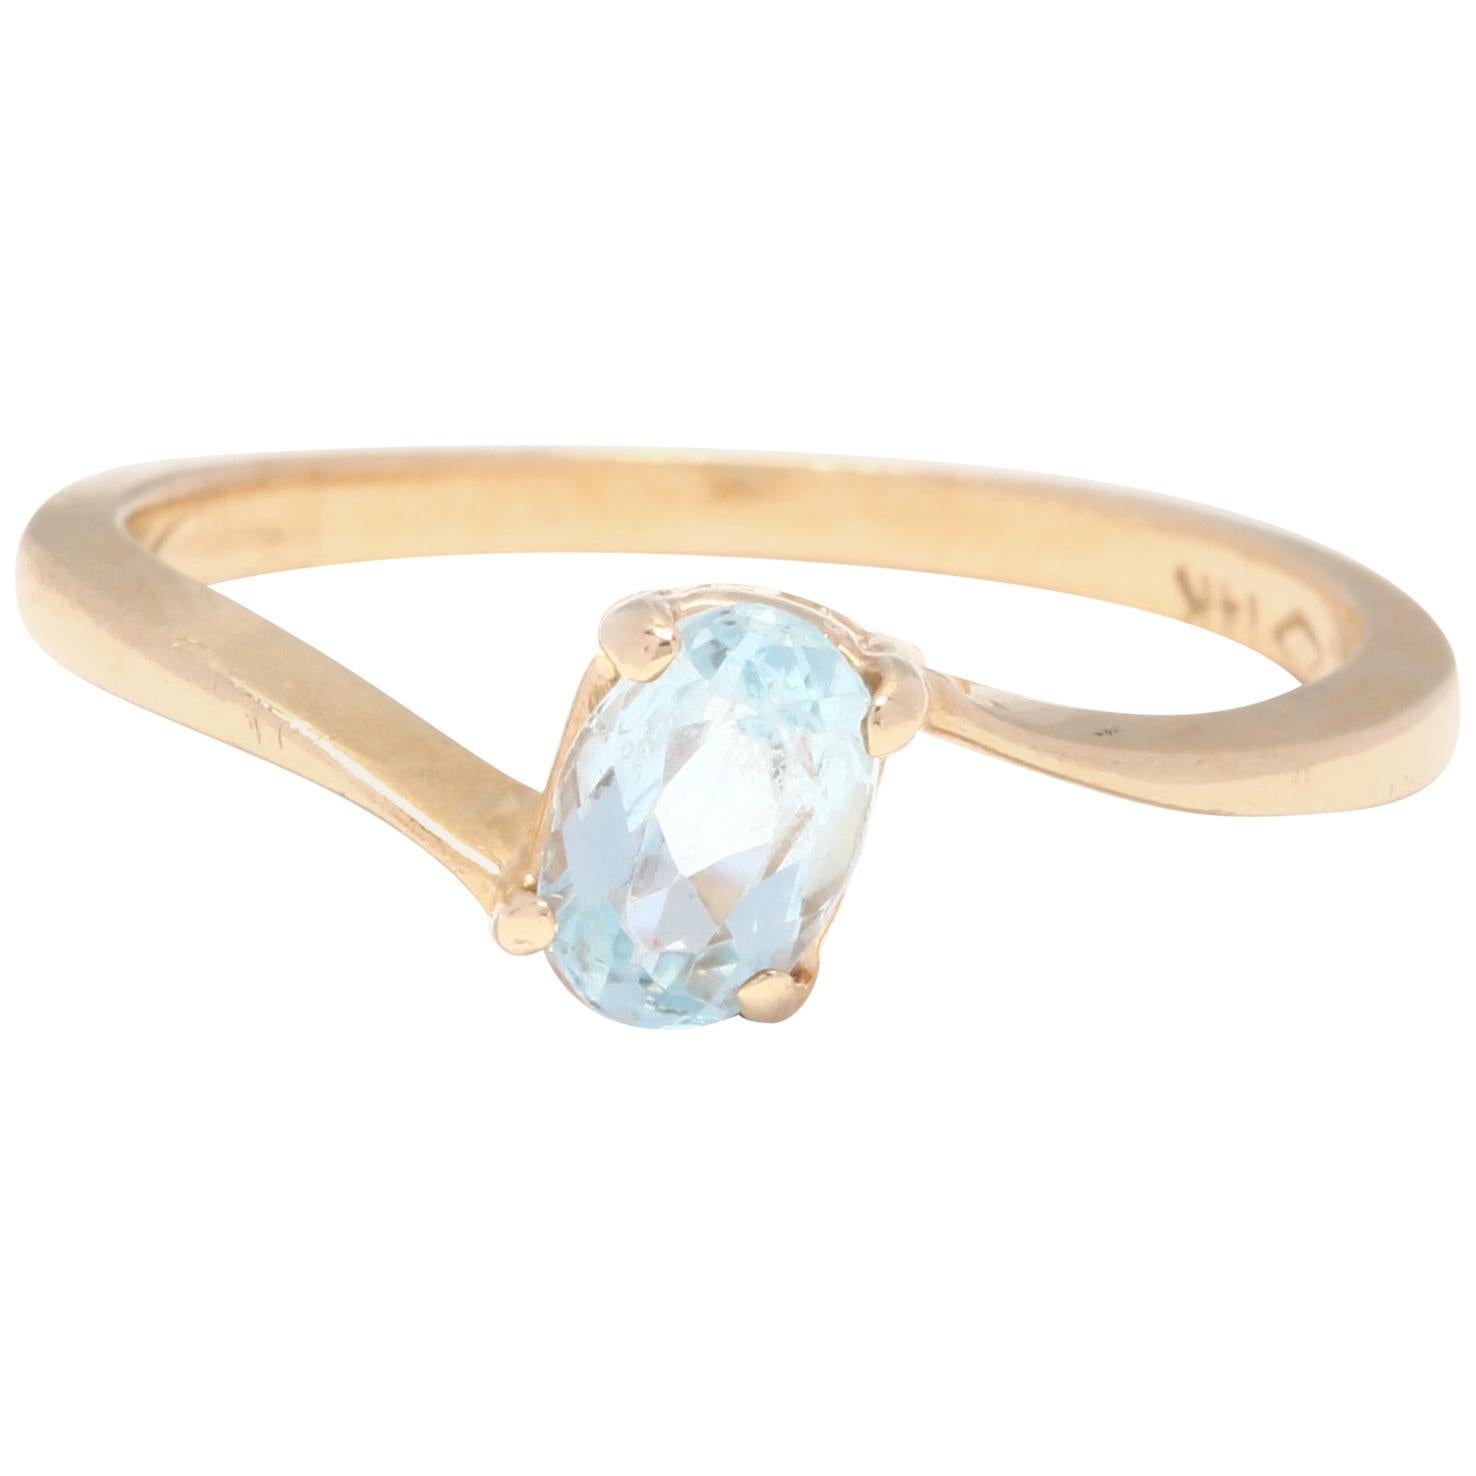 14 Karat Yellow Gold and Blue Topaz Bypass Solitaire Ring